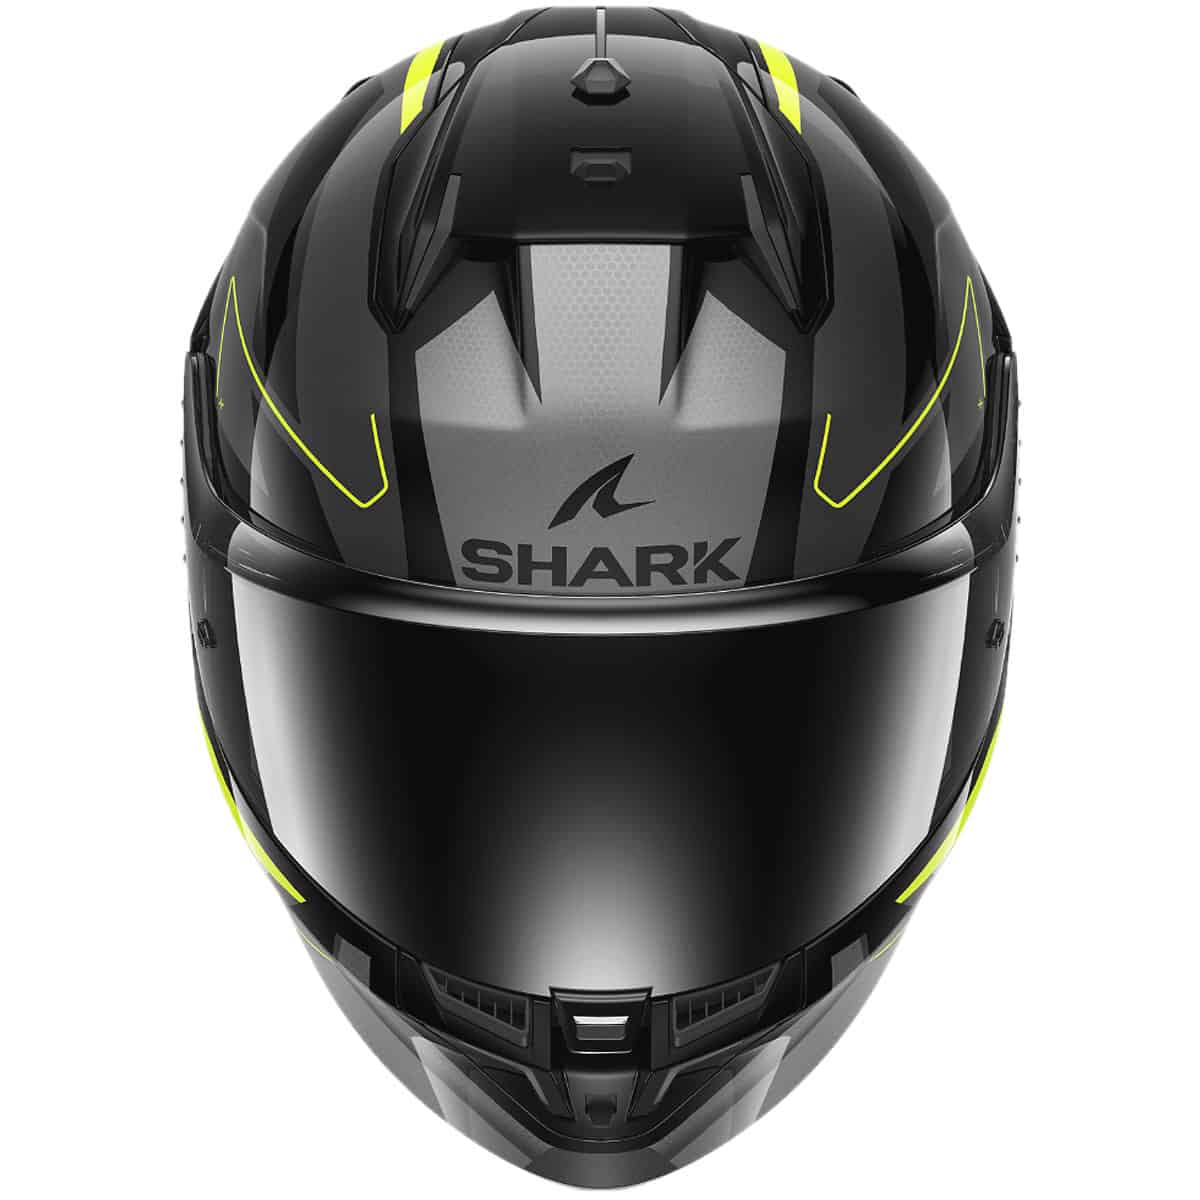 In this price class the Shark D-Skwal 3 offers one of the best interior fits for most head shapes front